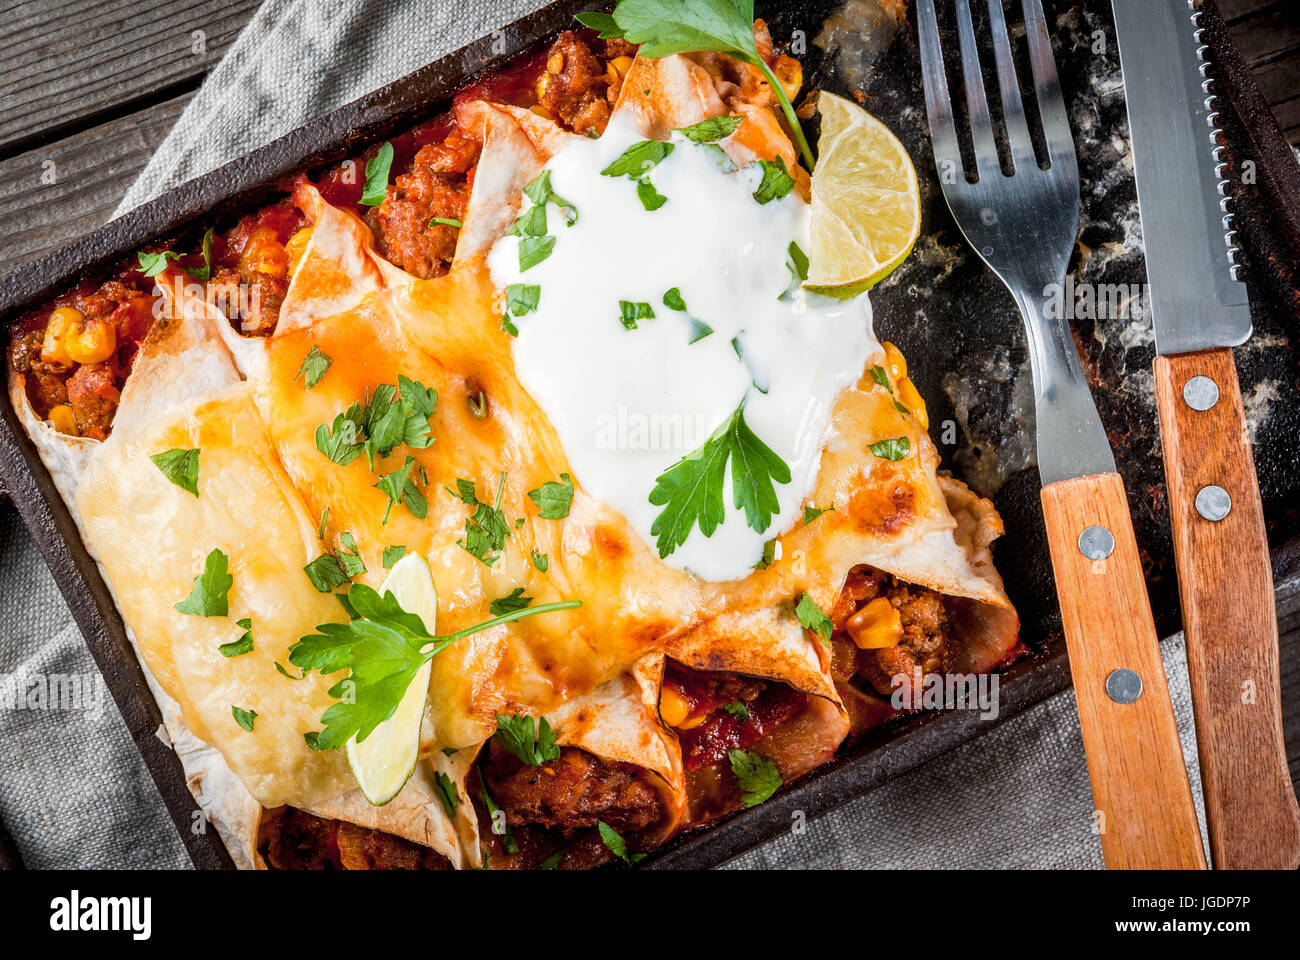 Mexican food. Cuisine of South America. Traditional dish of spicy beef enchiladas with corn, beans, tomato. On a baking tray, on old rustic wooden bac Stock Photo